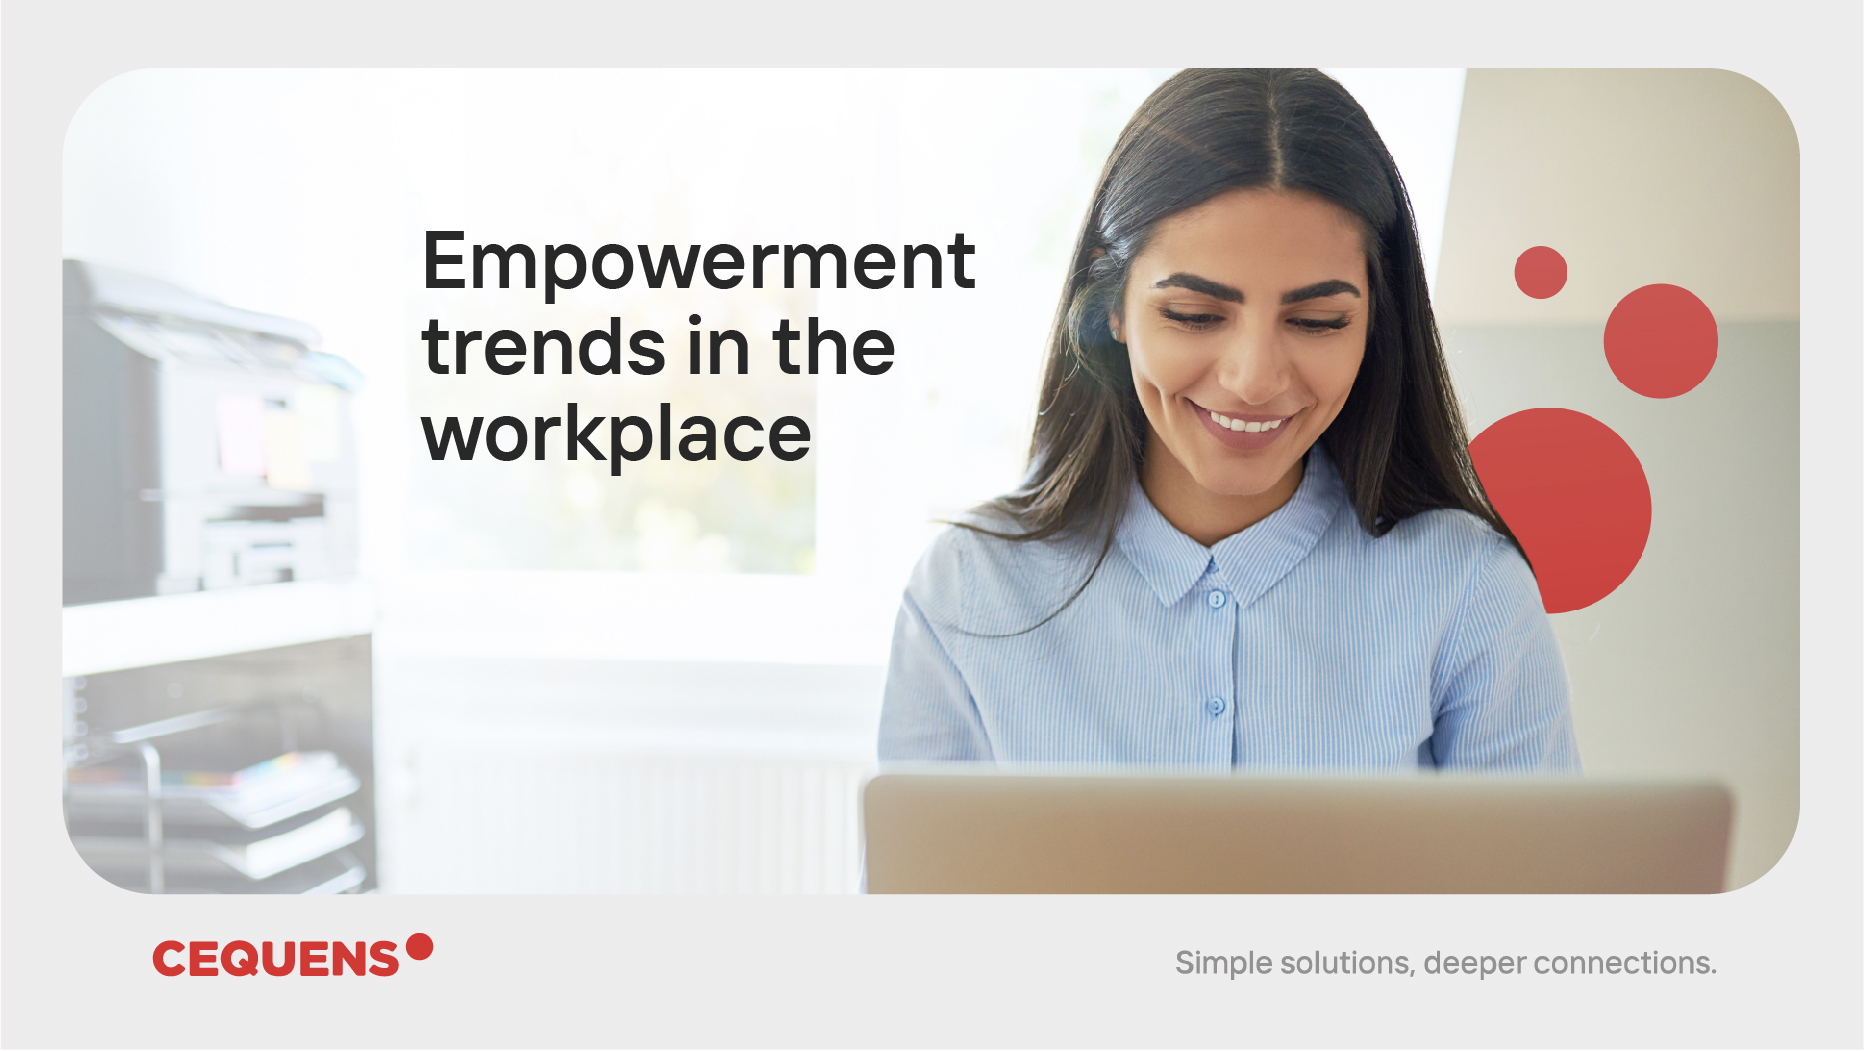 Empowerment trends in the workplace